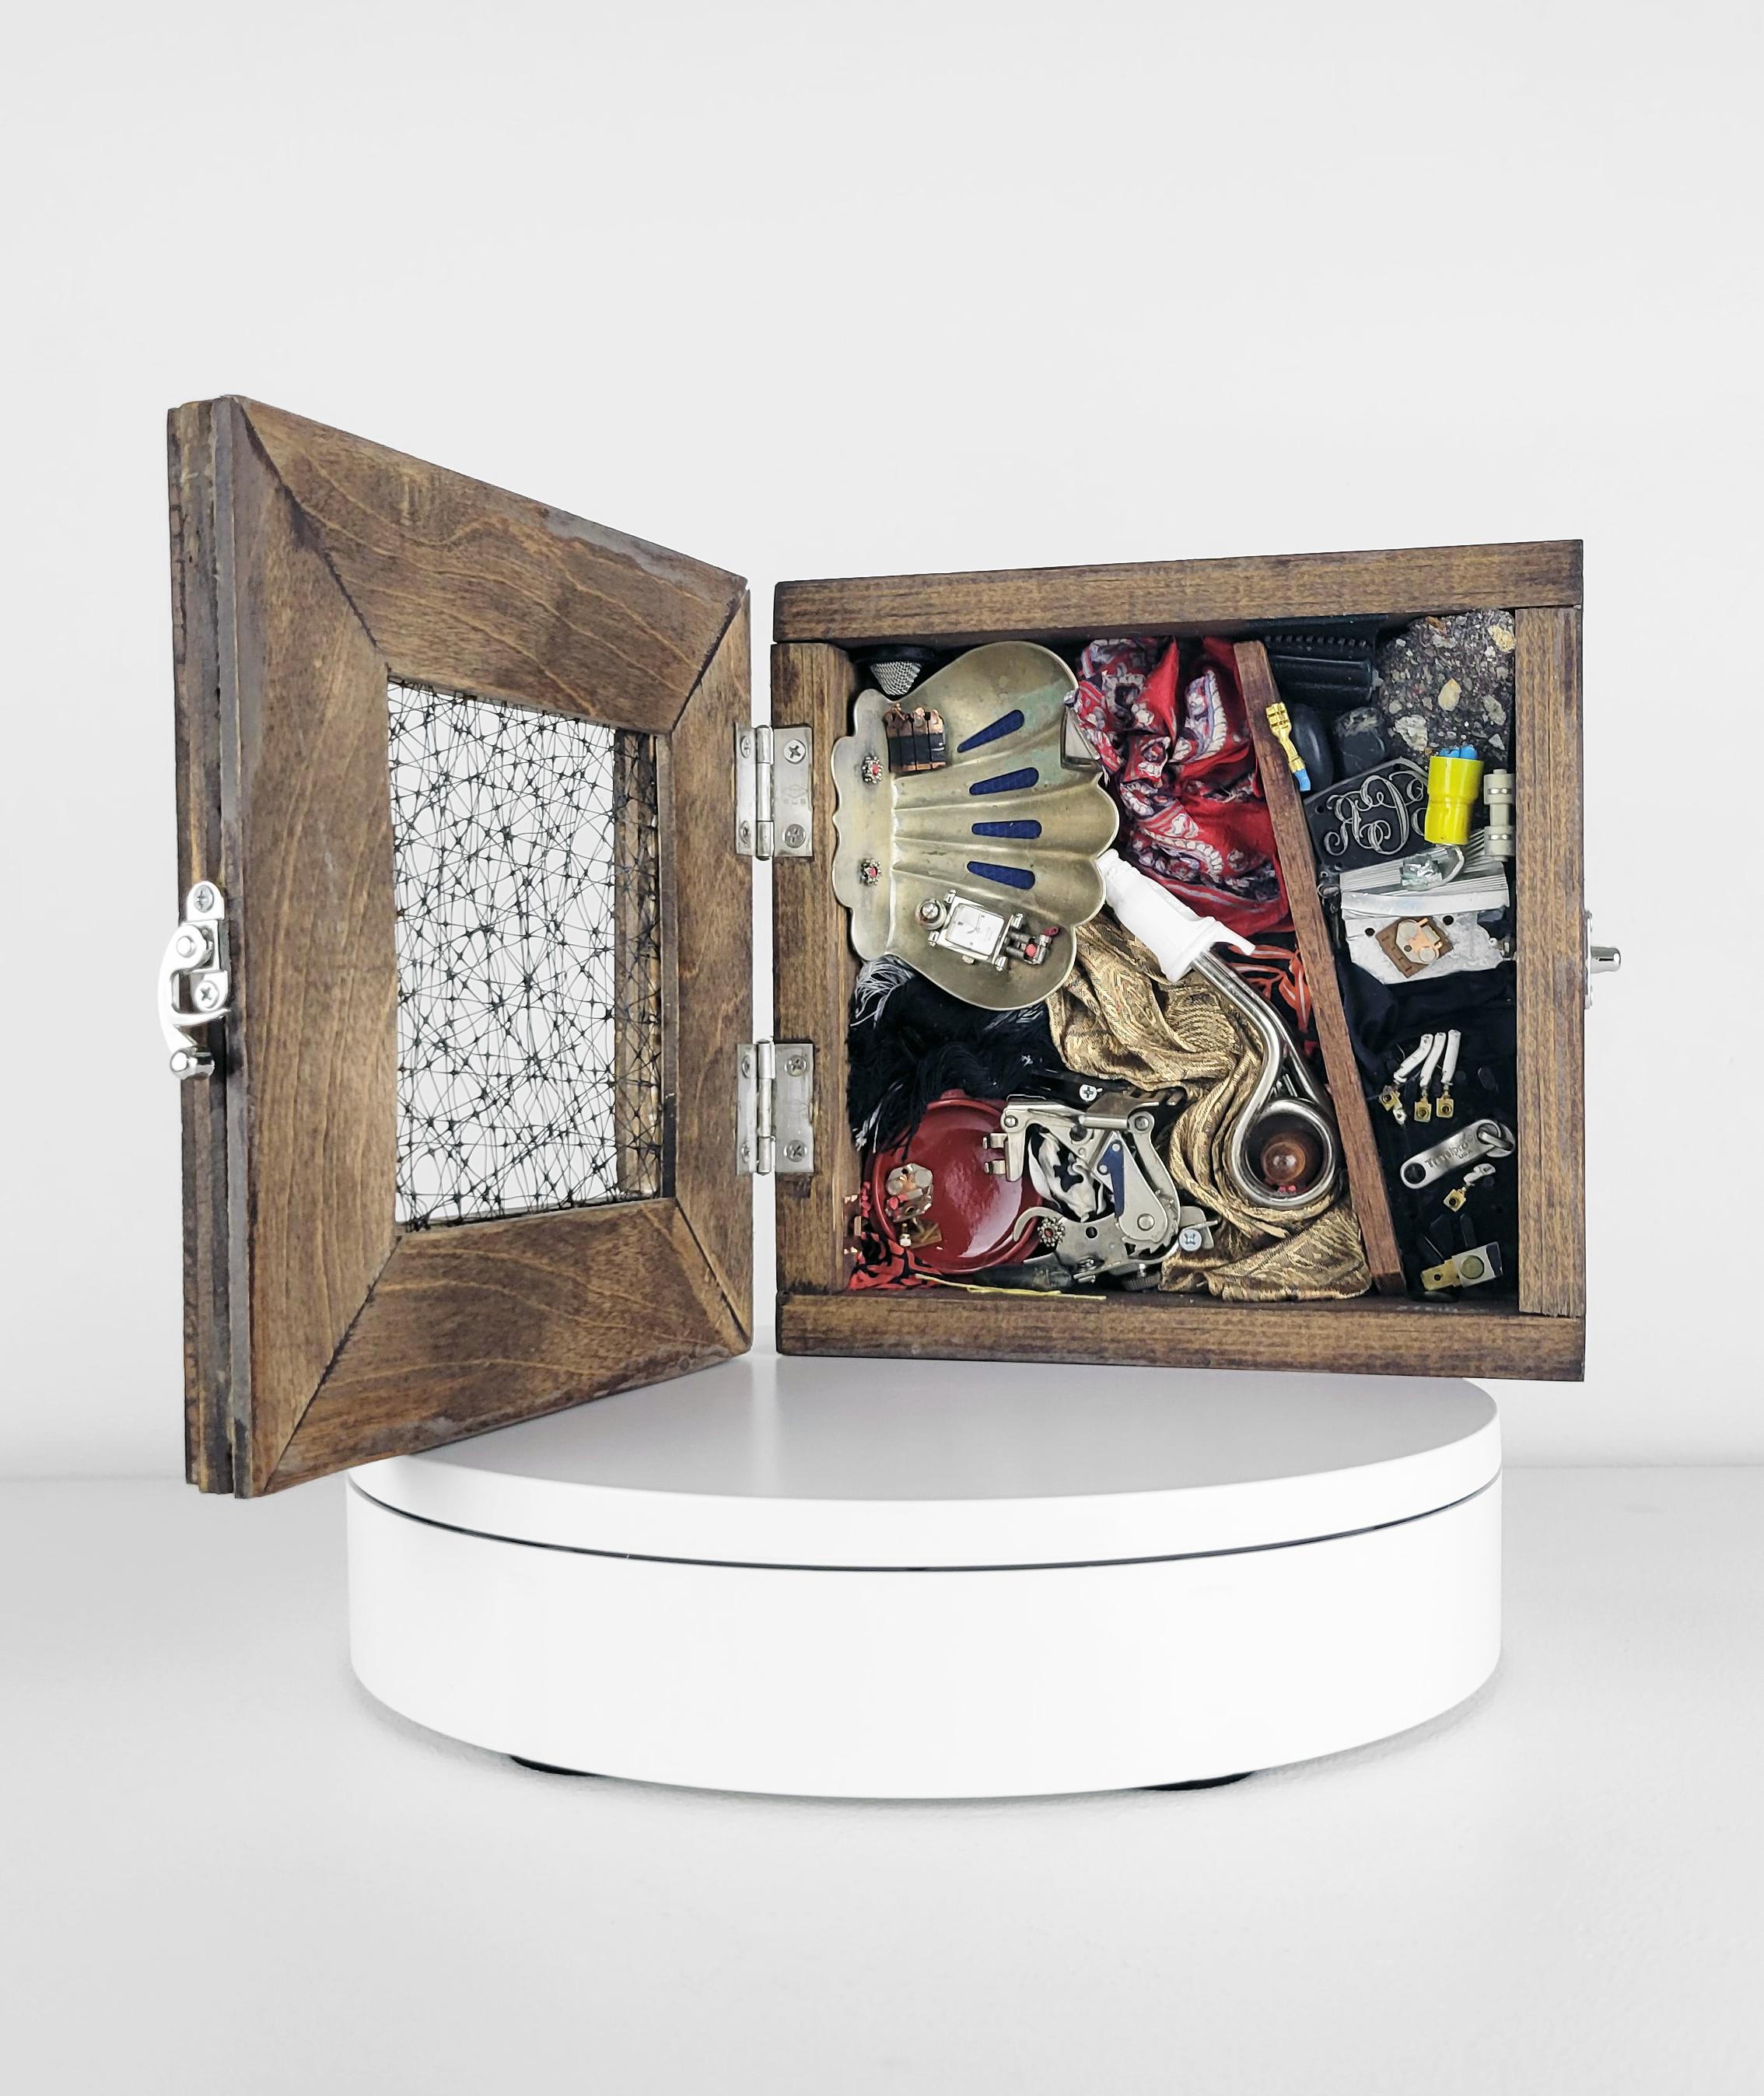 Linda Stein, Case 1204 - Contemporary Art Mixed Media Wunderkammer Sculpture

This work from Linda Stein's Displacement From Home series draws from the tradition of wunderkammer/cabinets of curiosities to highlight the global displacement and